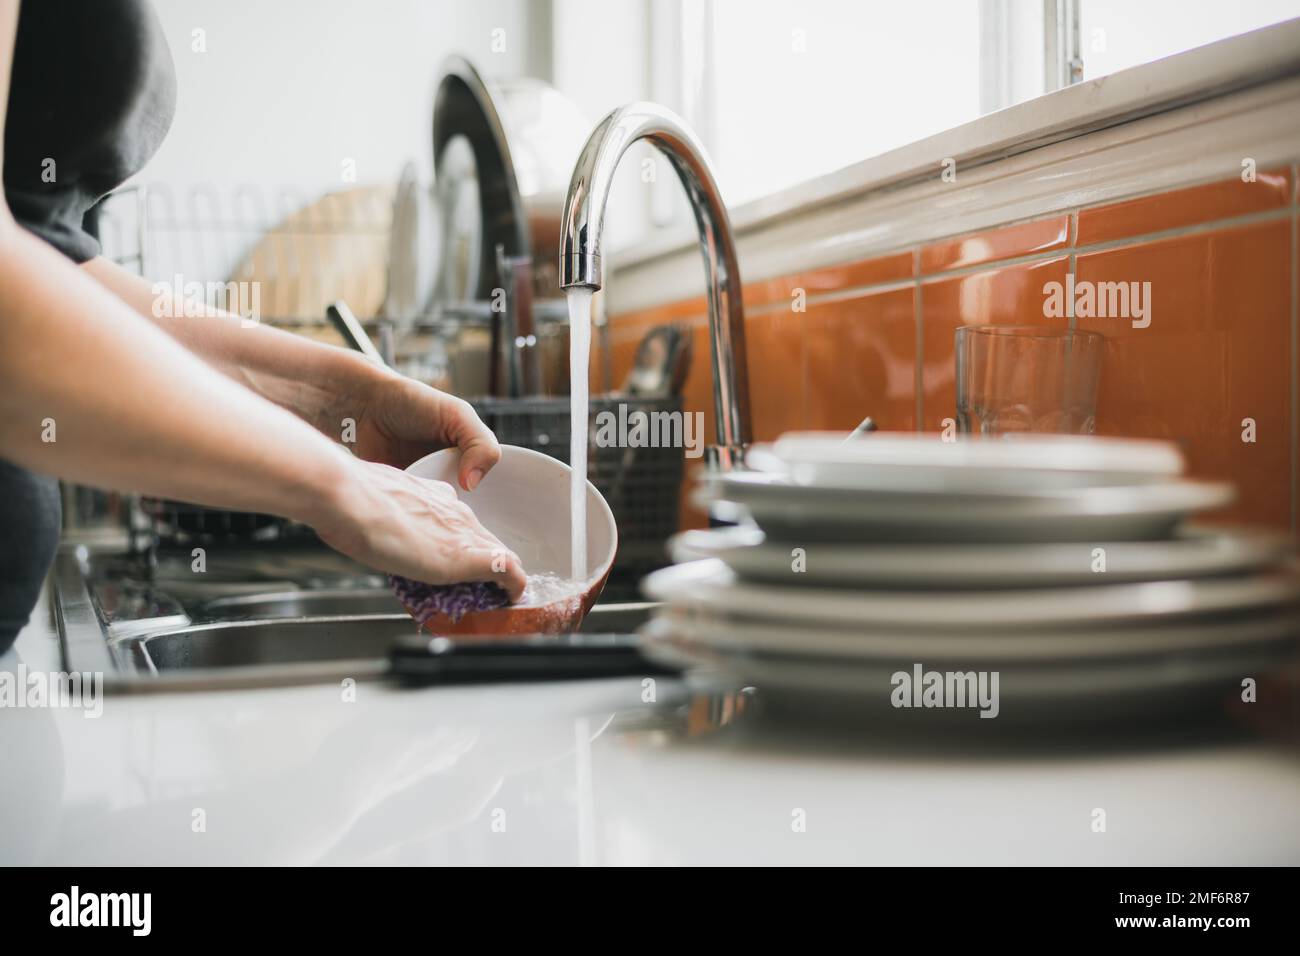 Woman washing dishes in kitchen sink, close up of hands while cleaning Stock Photo